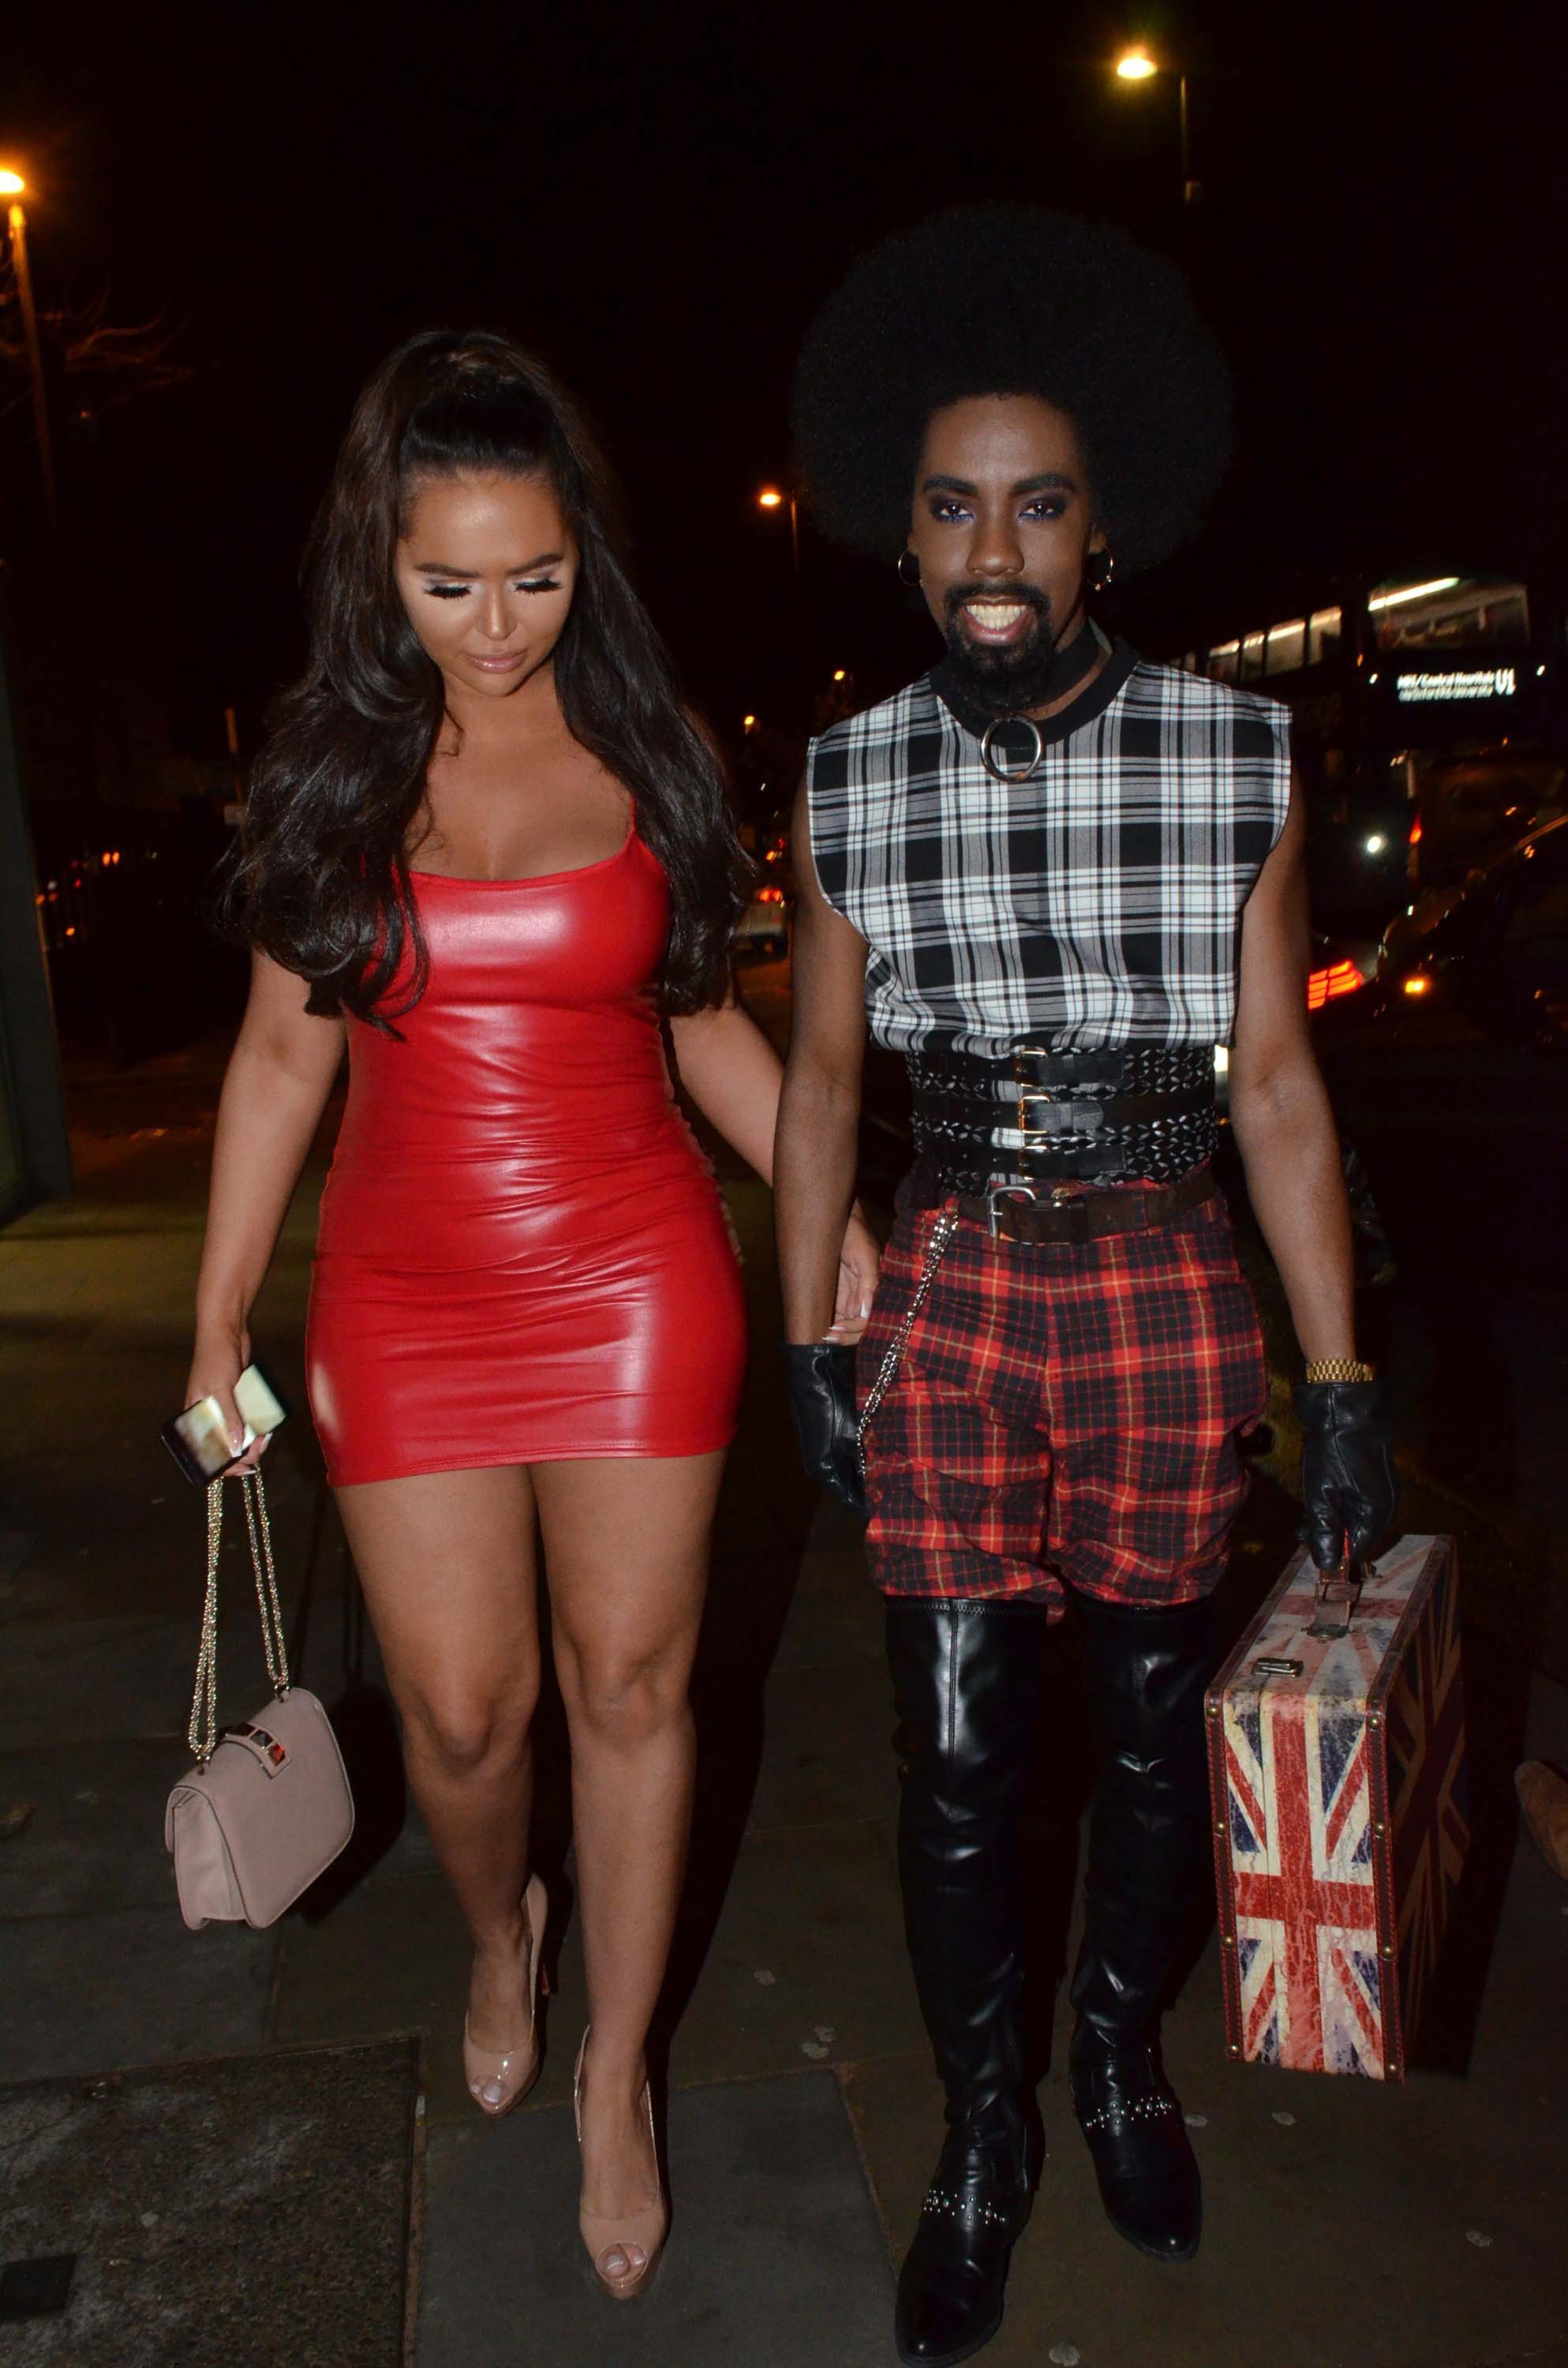 Chanelle McCleary and Jsky arrive at Manchester House Bar And Restaurant